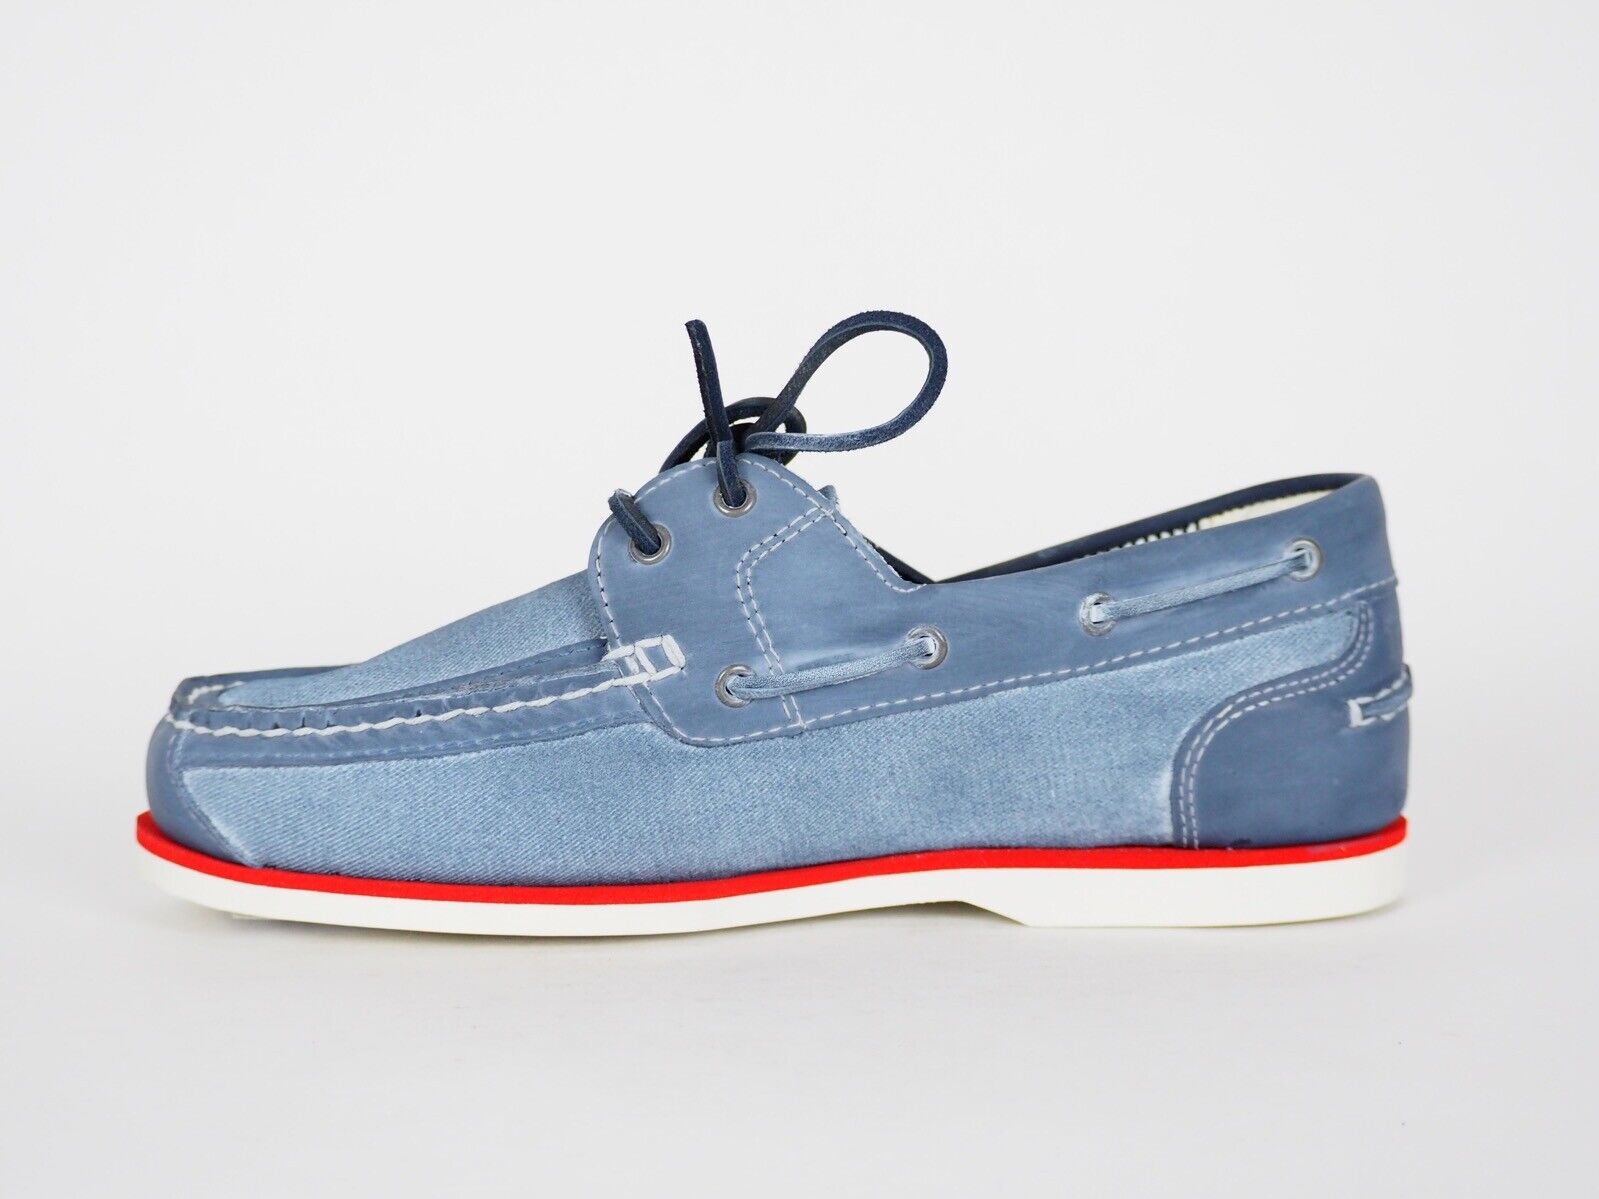 Womens Timberland Amherst 24675 Navy Leather Fabric Boat Shoes - London Top Style